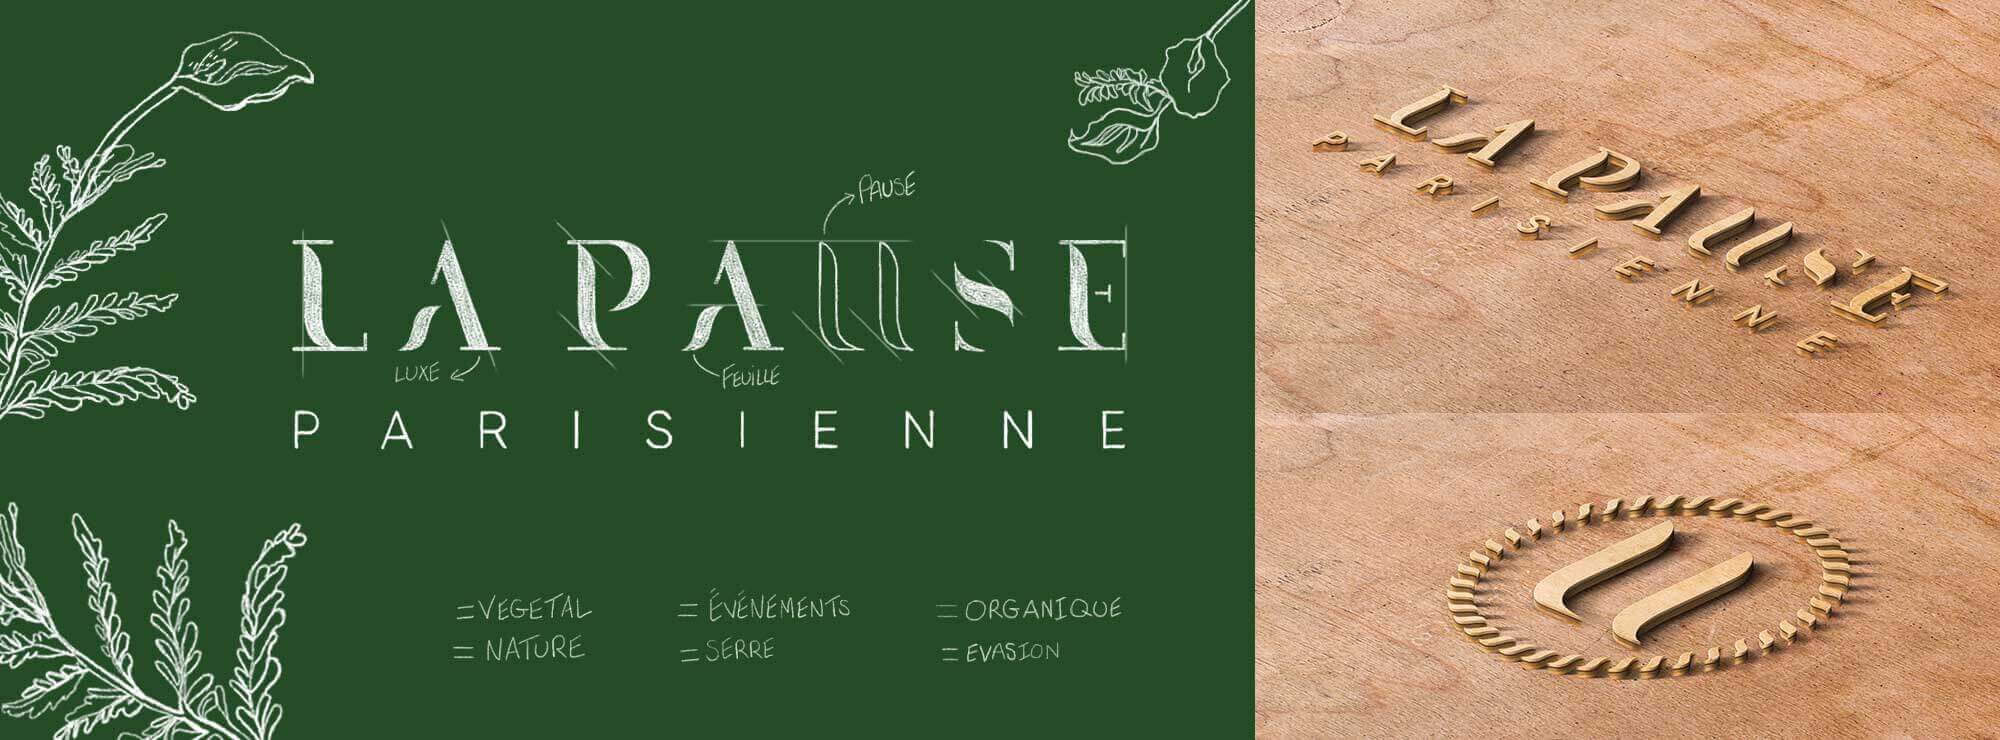 La pause parisienne - a very natural logo and website